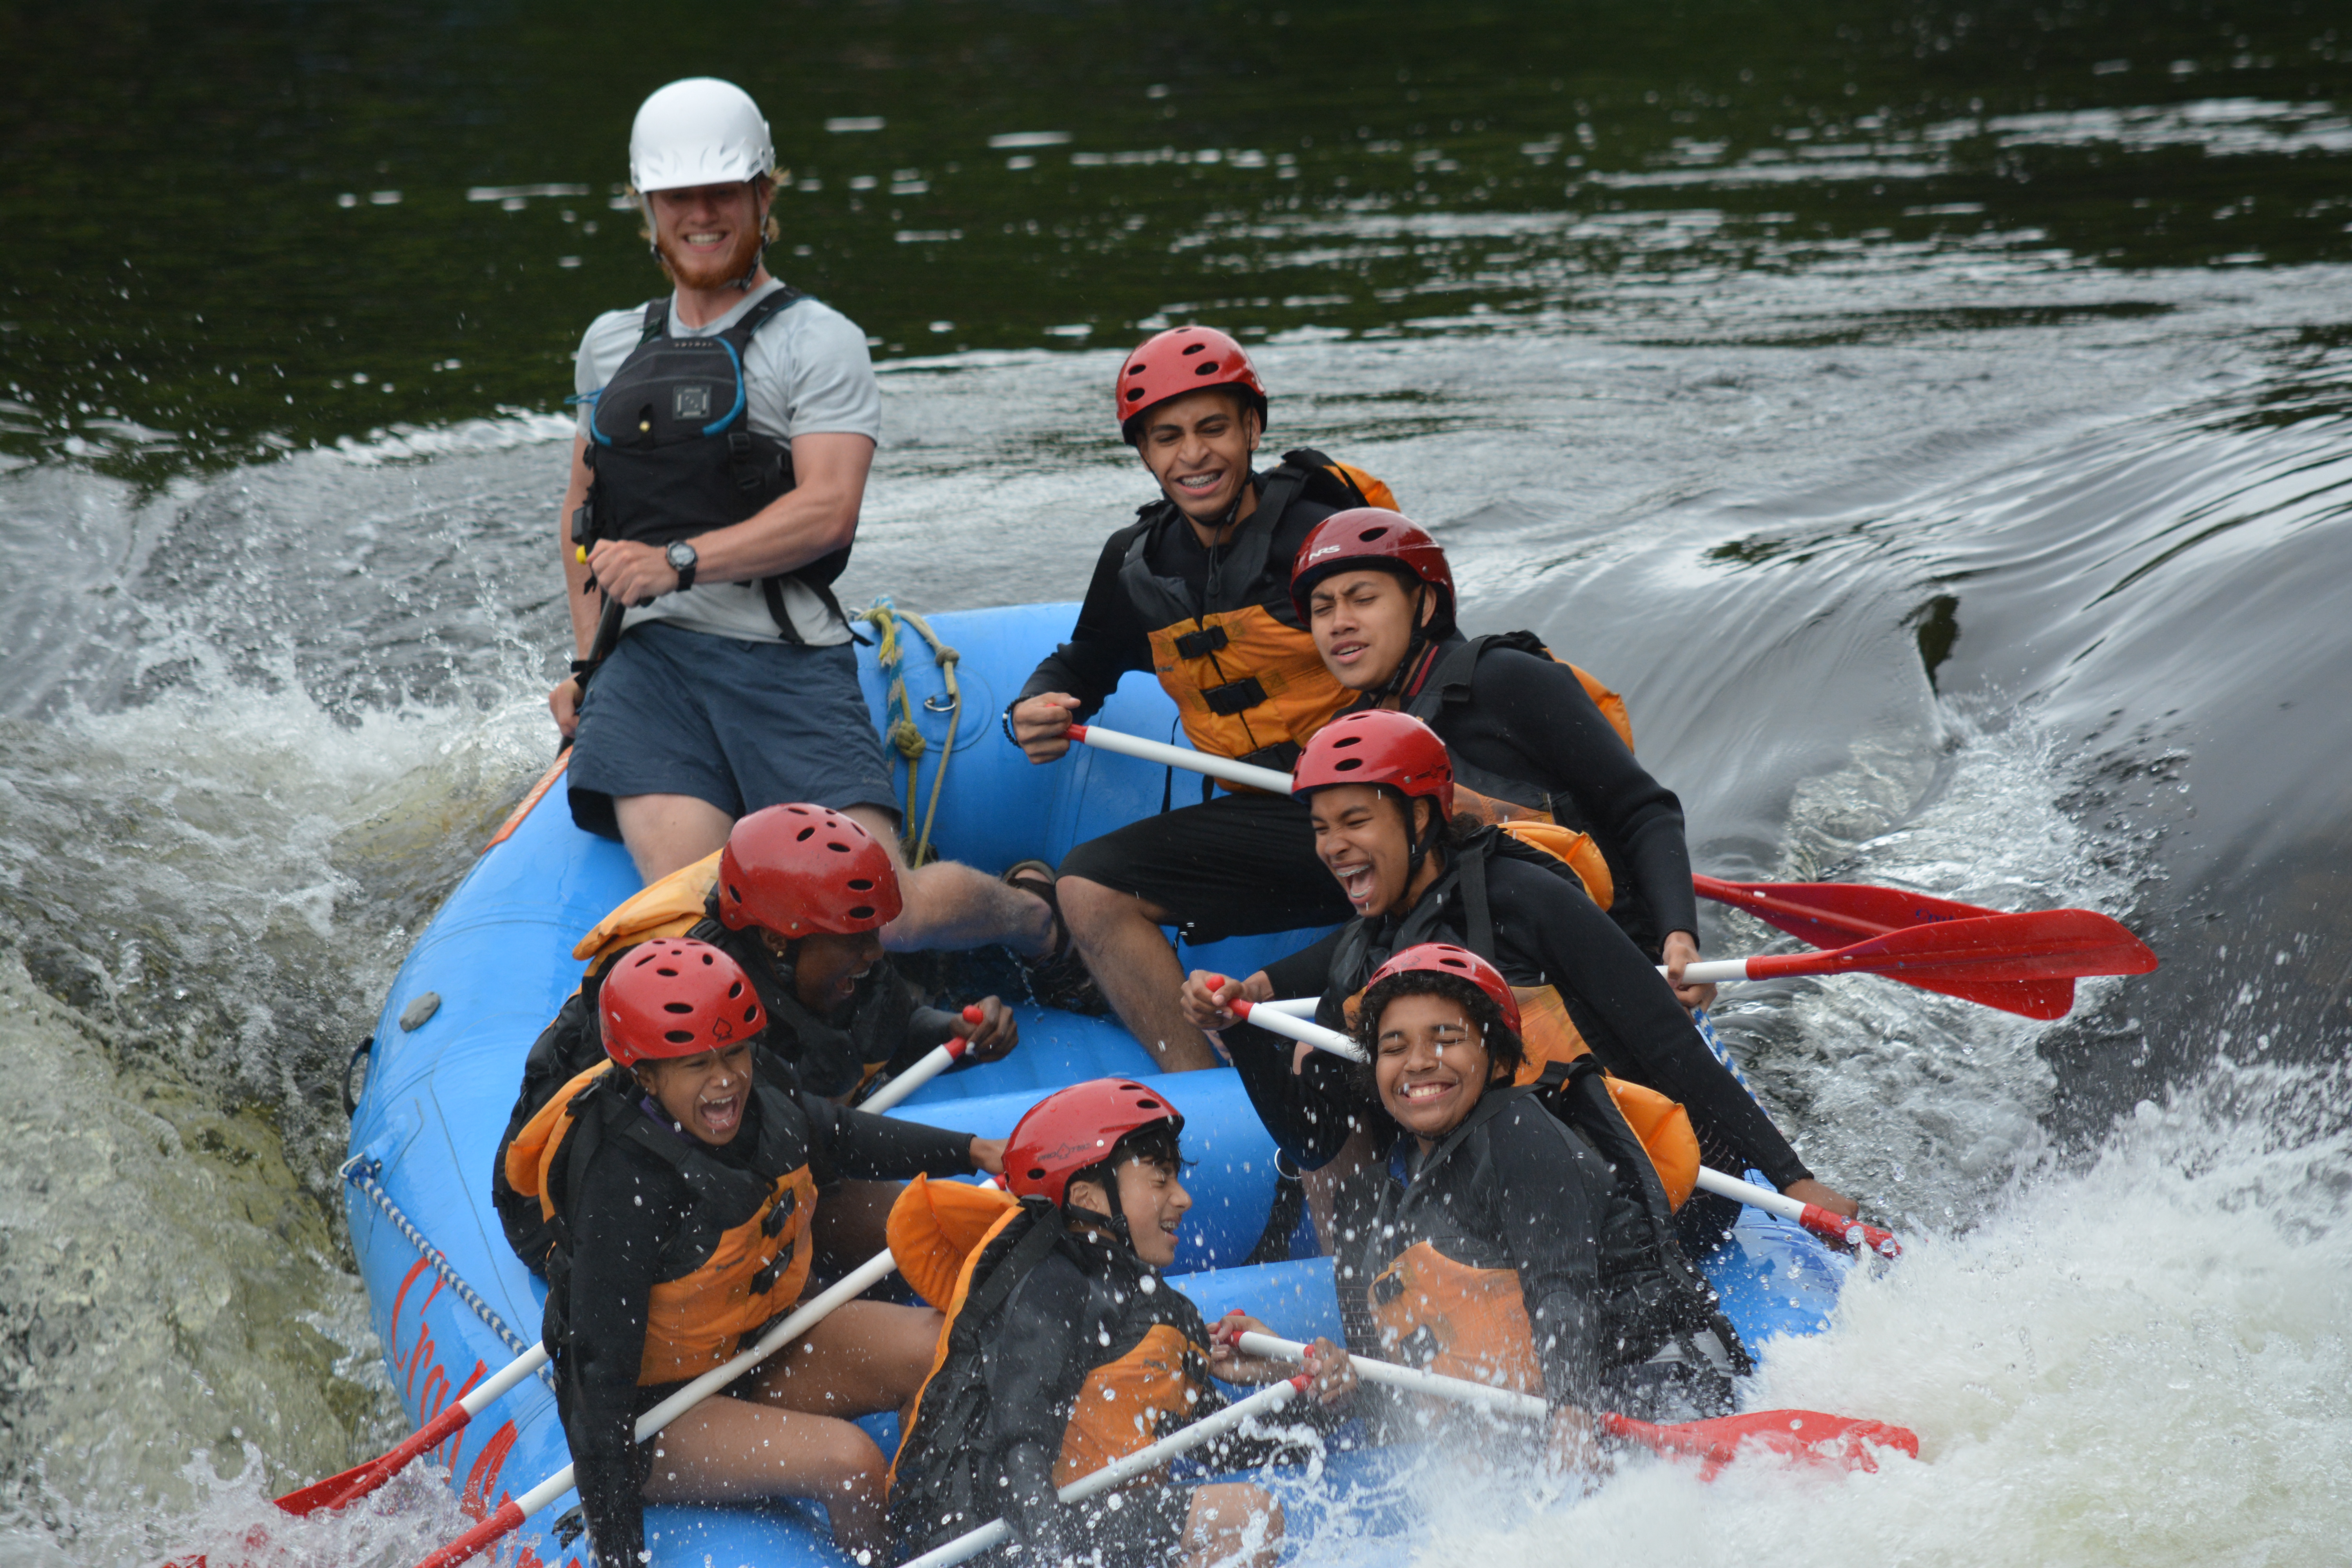 Youth group rafting down a river.